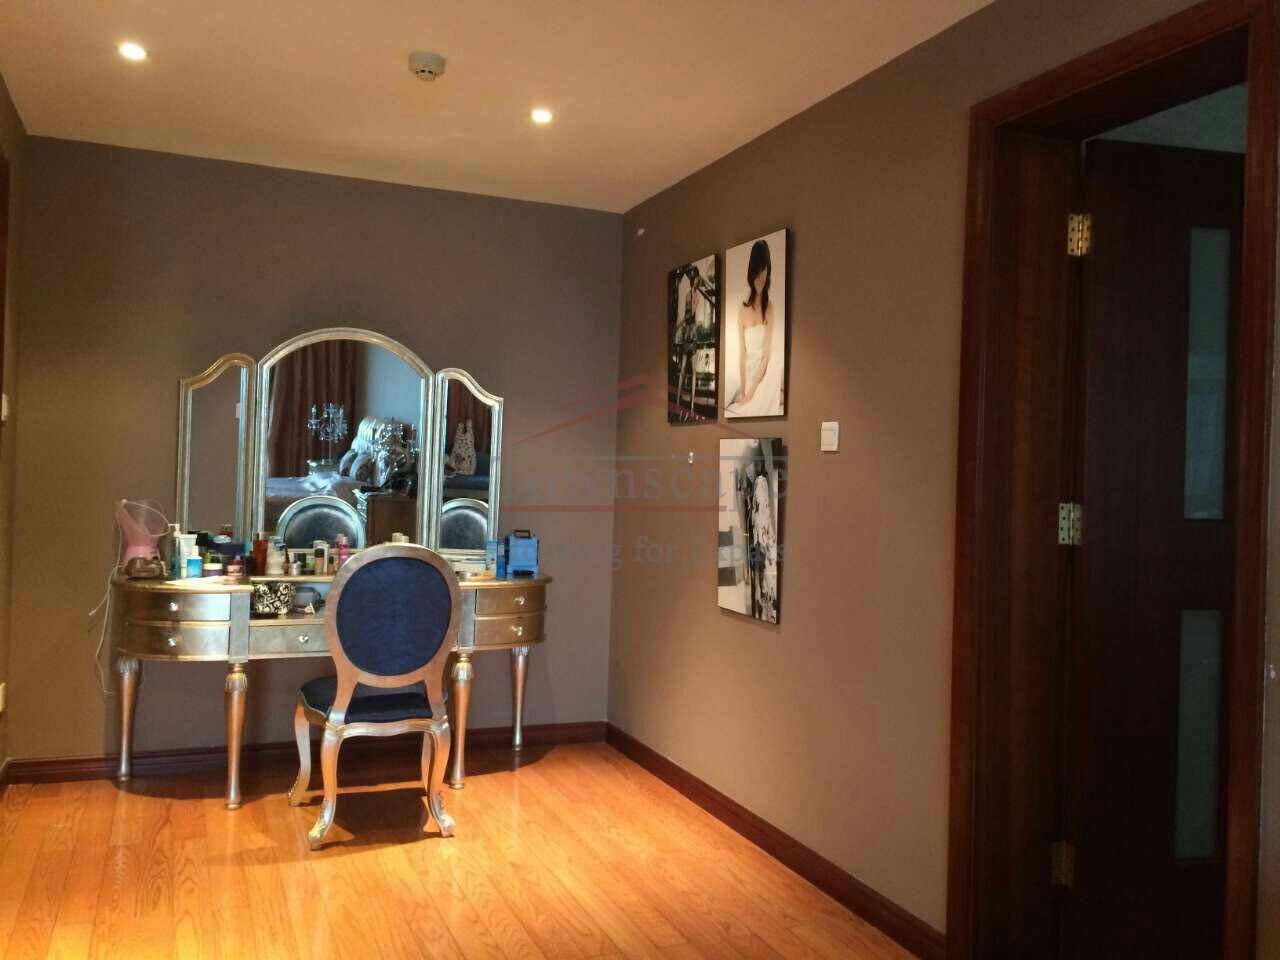 Rent Shanghai China Large 3 BR Apartment in exclusive Skyline mansion Pudong